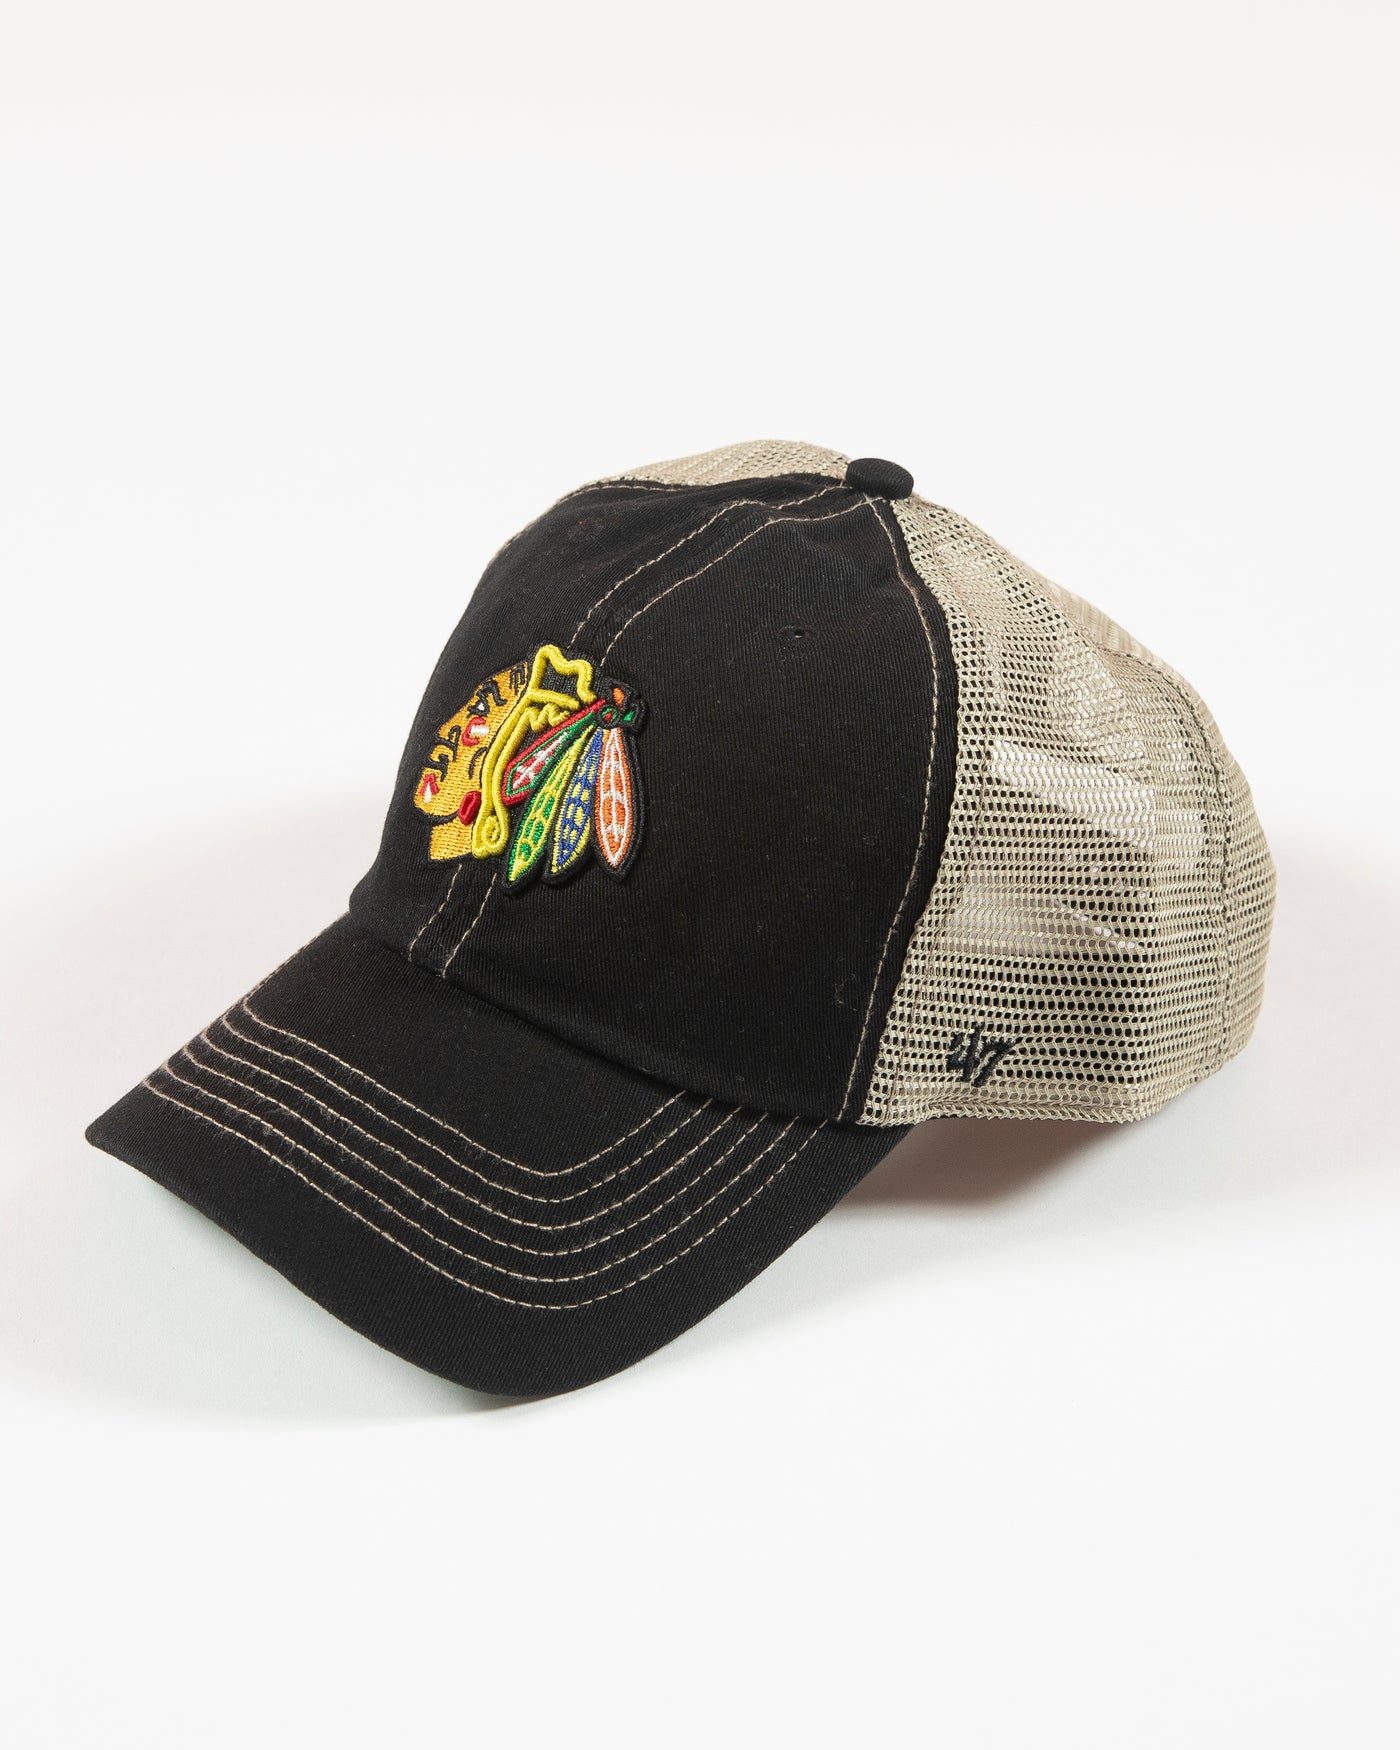 '47 adjustable clean up cap with Chicago Blackhawks primary logo embroidered on front in an all over black and tan colorway - left angle lay flat